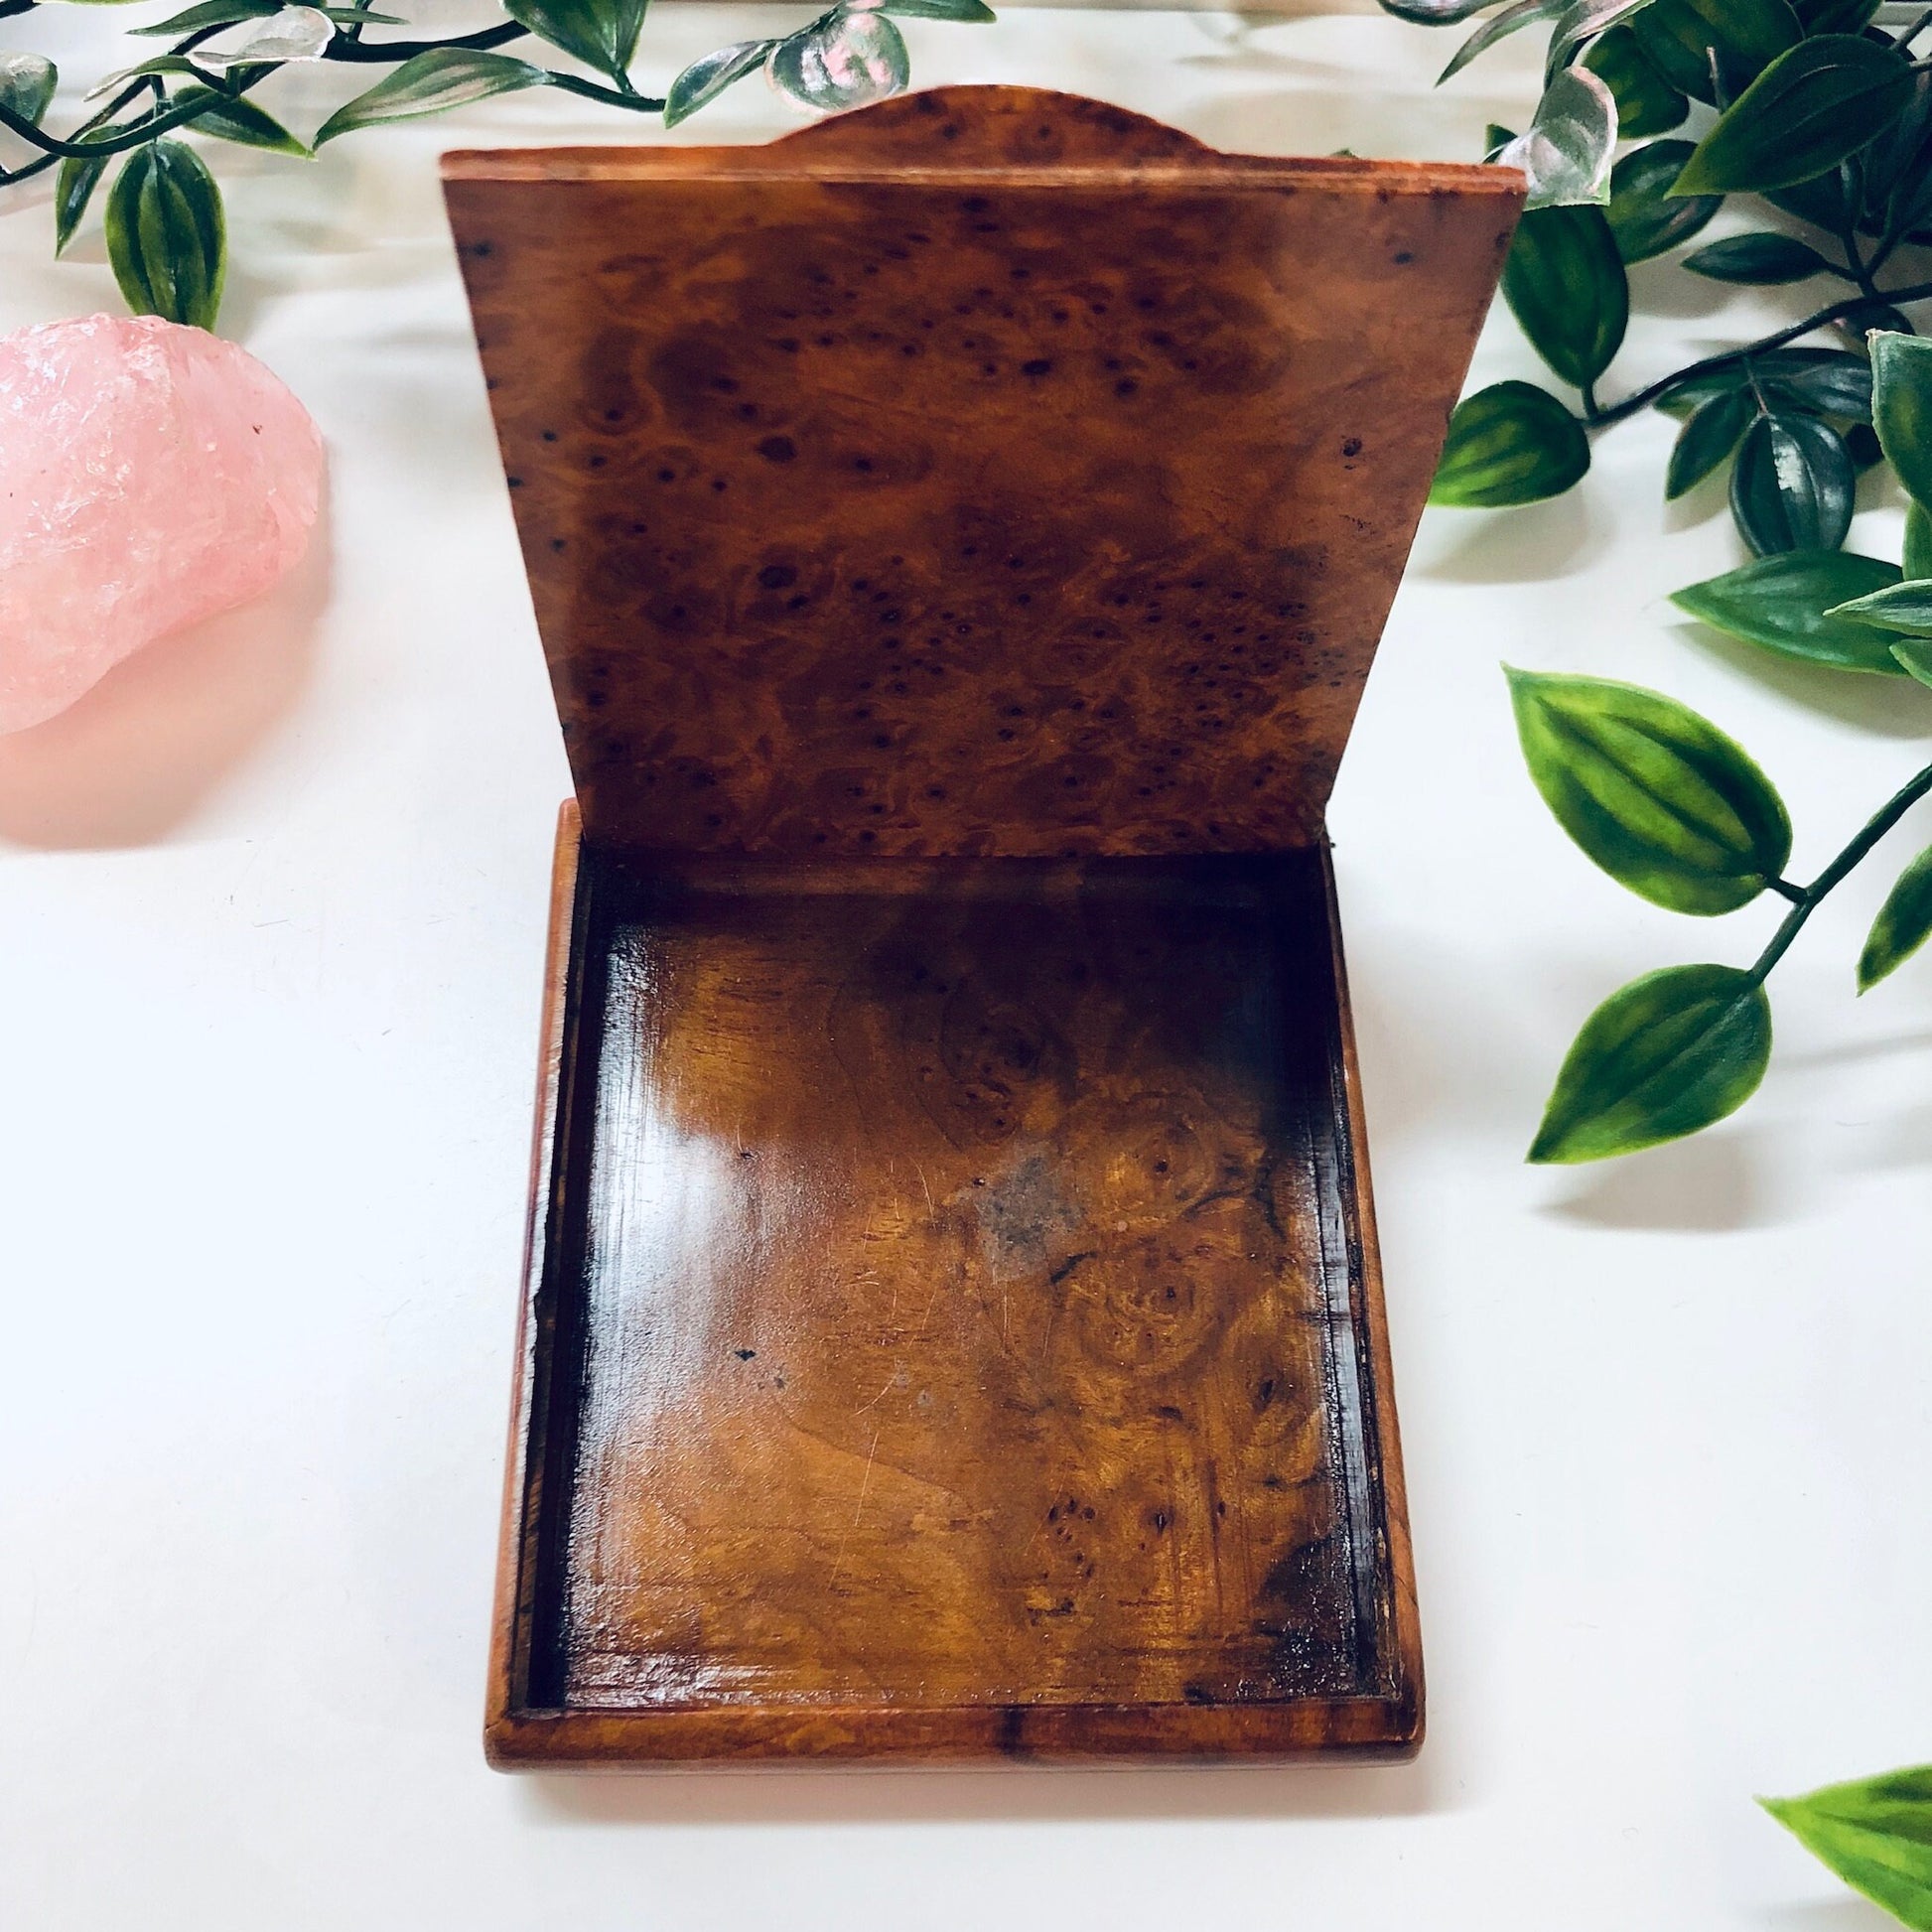 Vintage wooden hinged box with burl wood grain pattern, could be used as a cigarette case, business card holder or small container, surrounded by greenery on a light colored background.